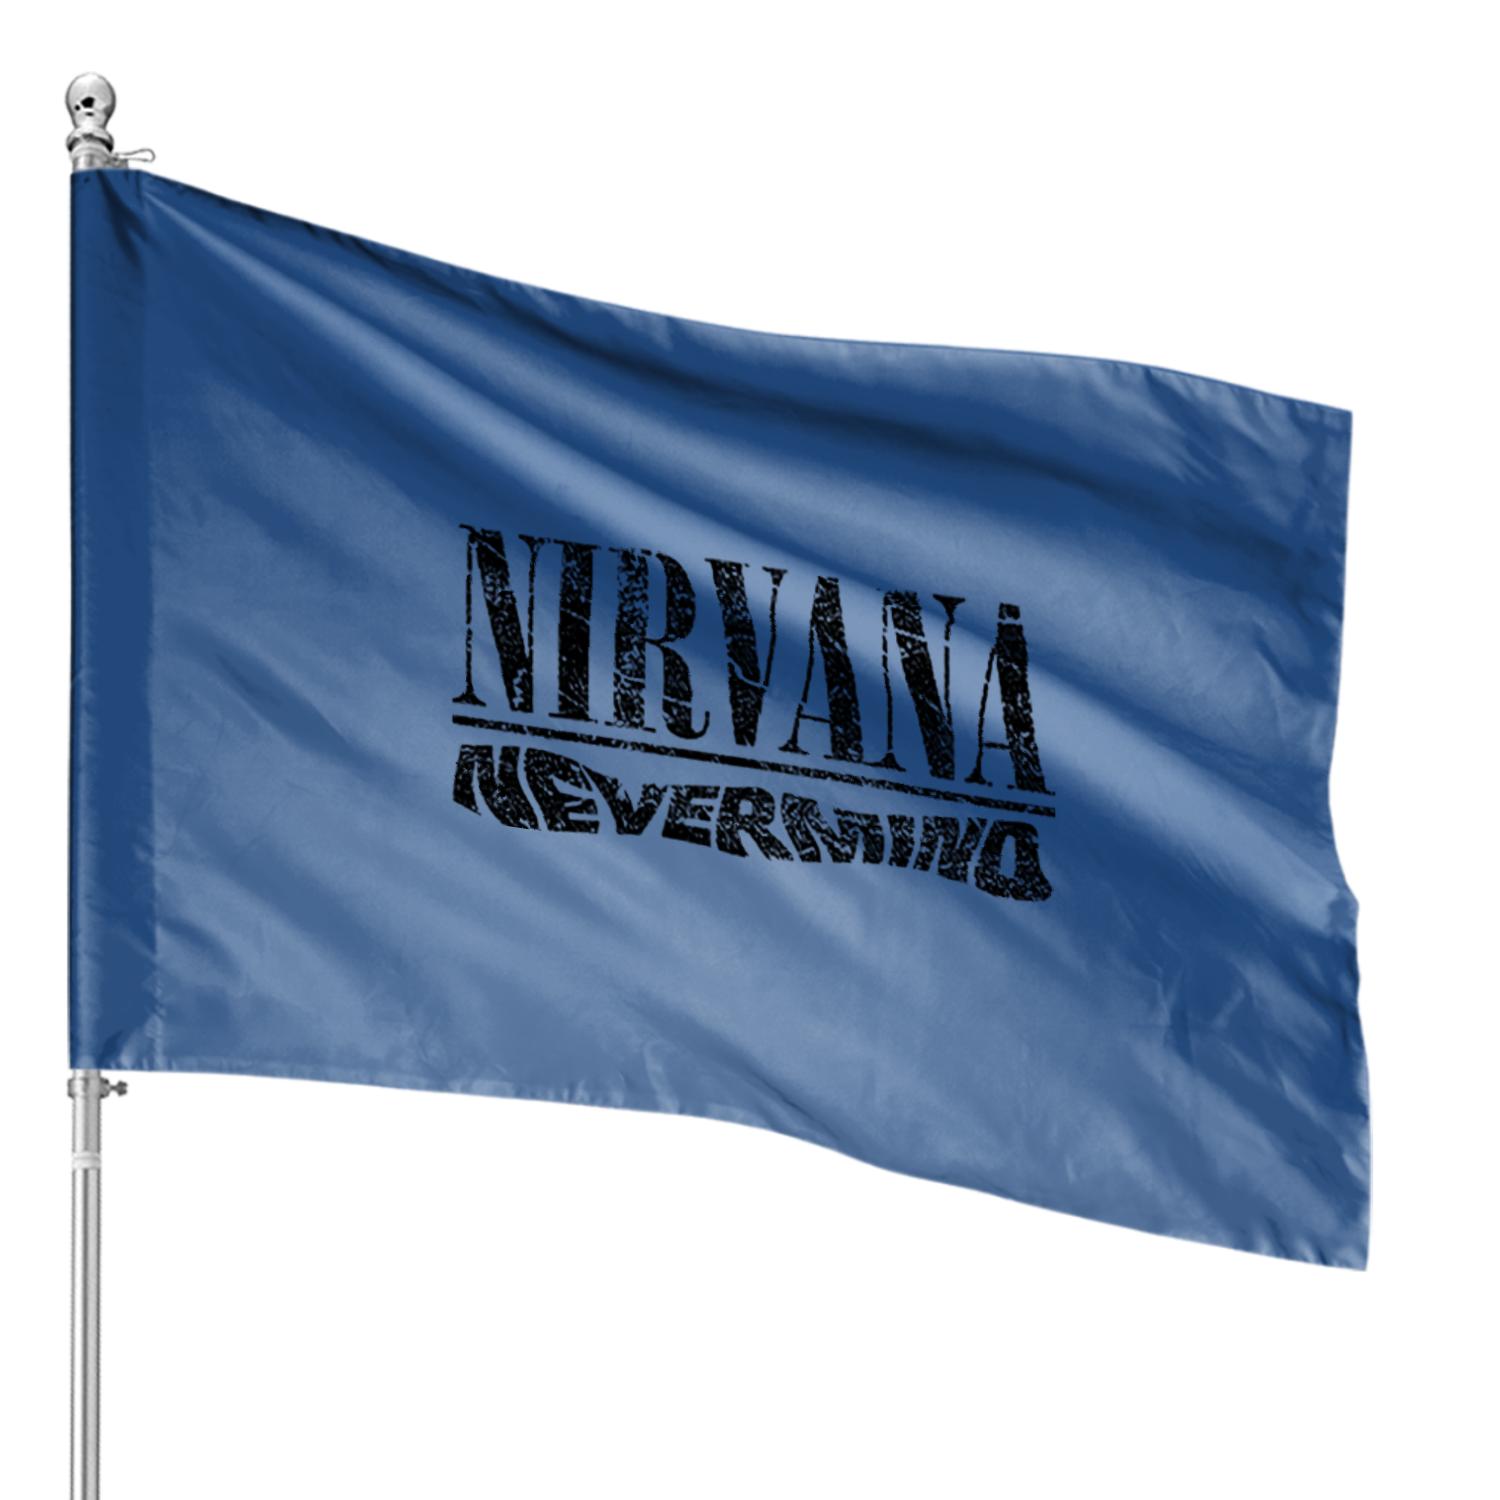 Nirvana Nevermind Music Rock Band House Flags